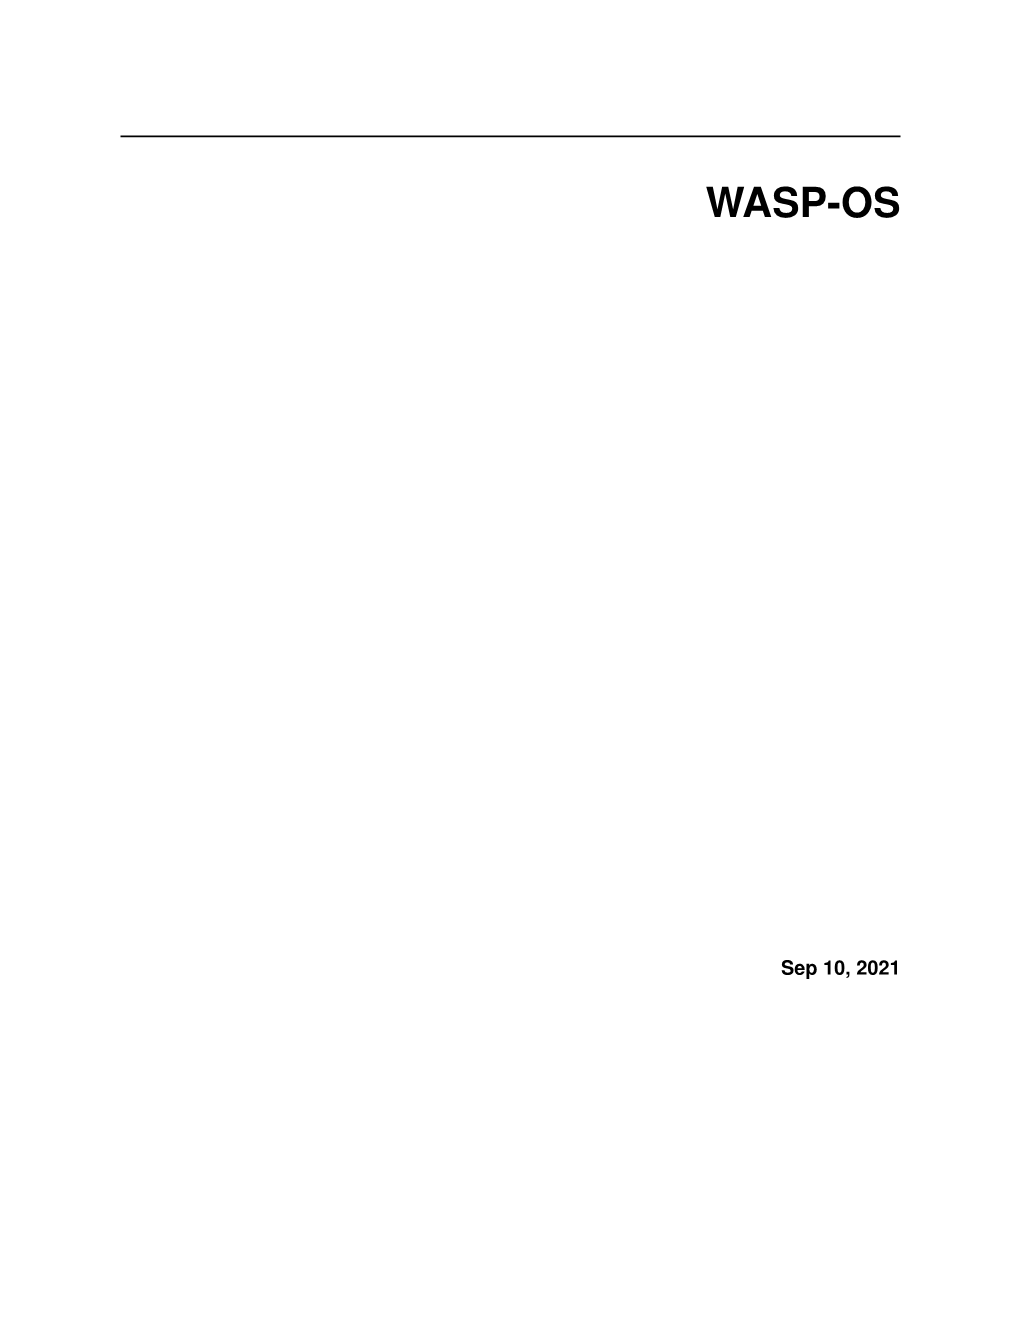 Latest and Greatest Wasp-Os on Your Watch Then the CI Builds Are Fo You